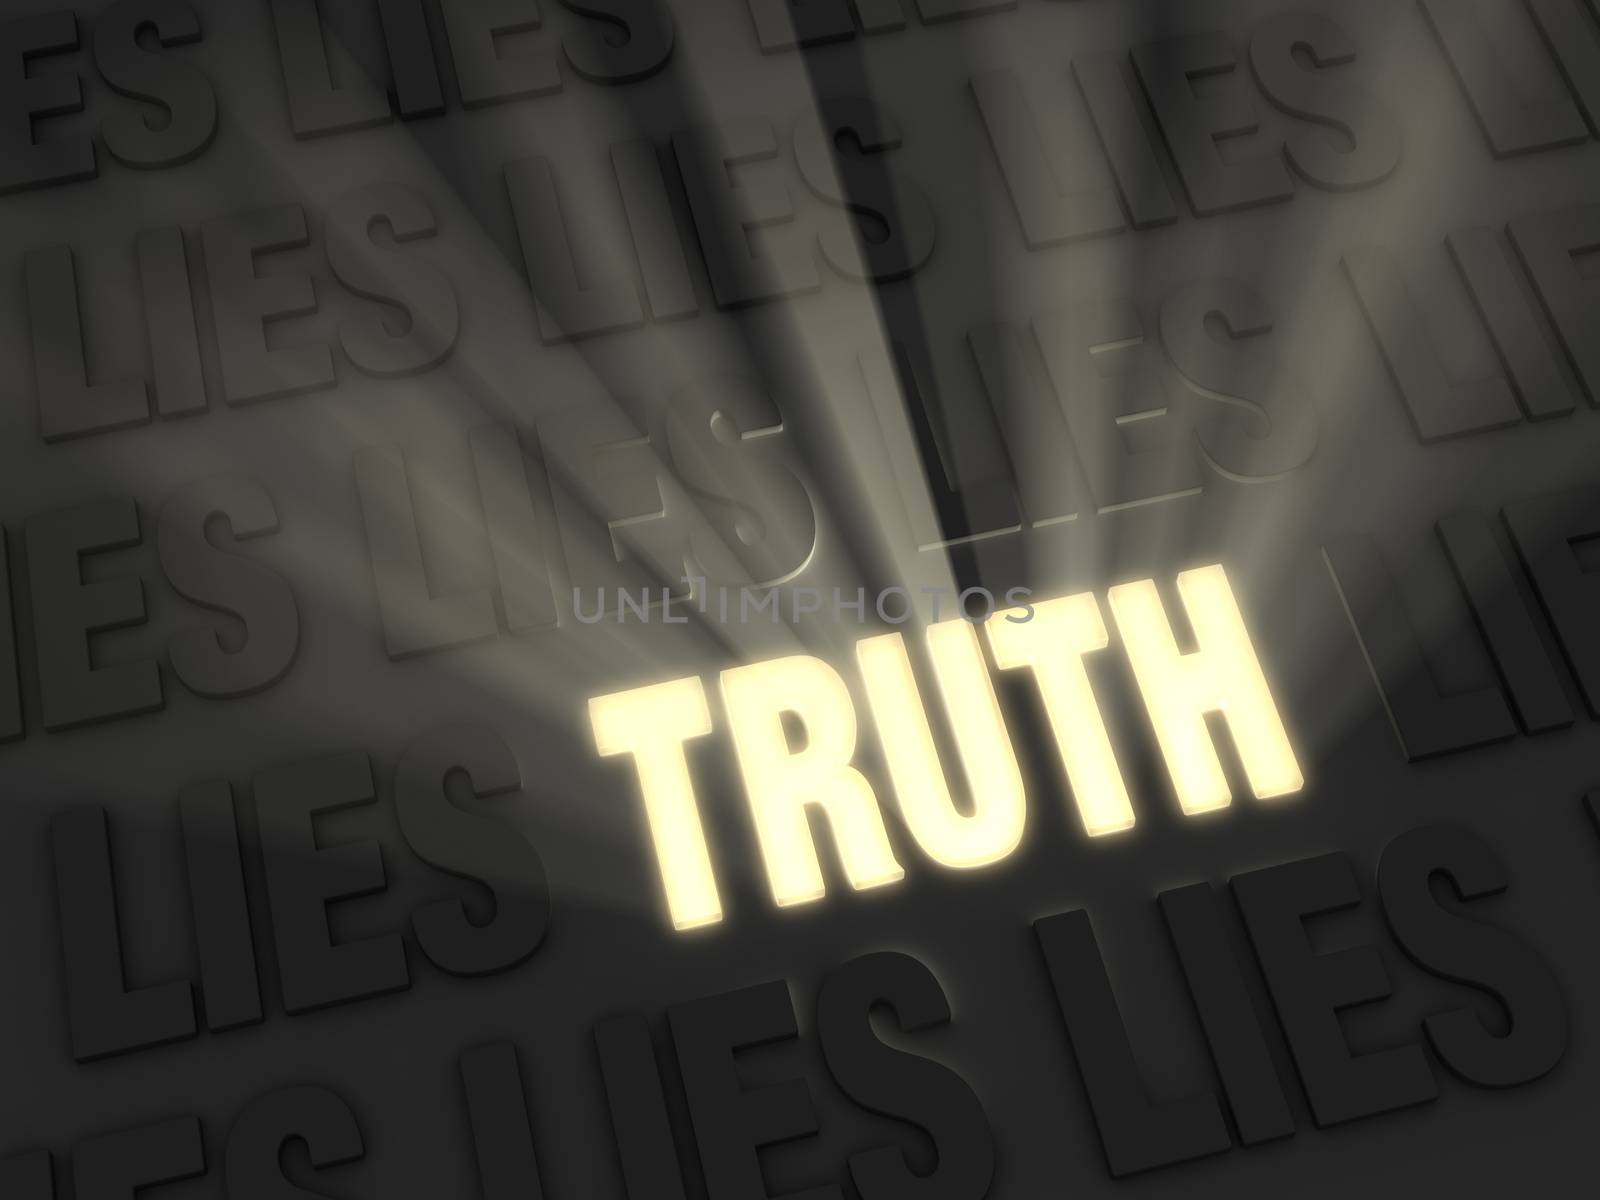 Light rays burst from a bright, gold glowing "TRUTH" on a dark background of "LIE"s